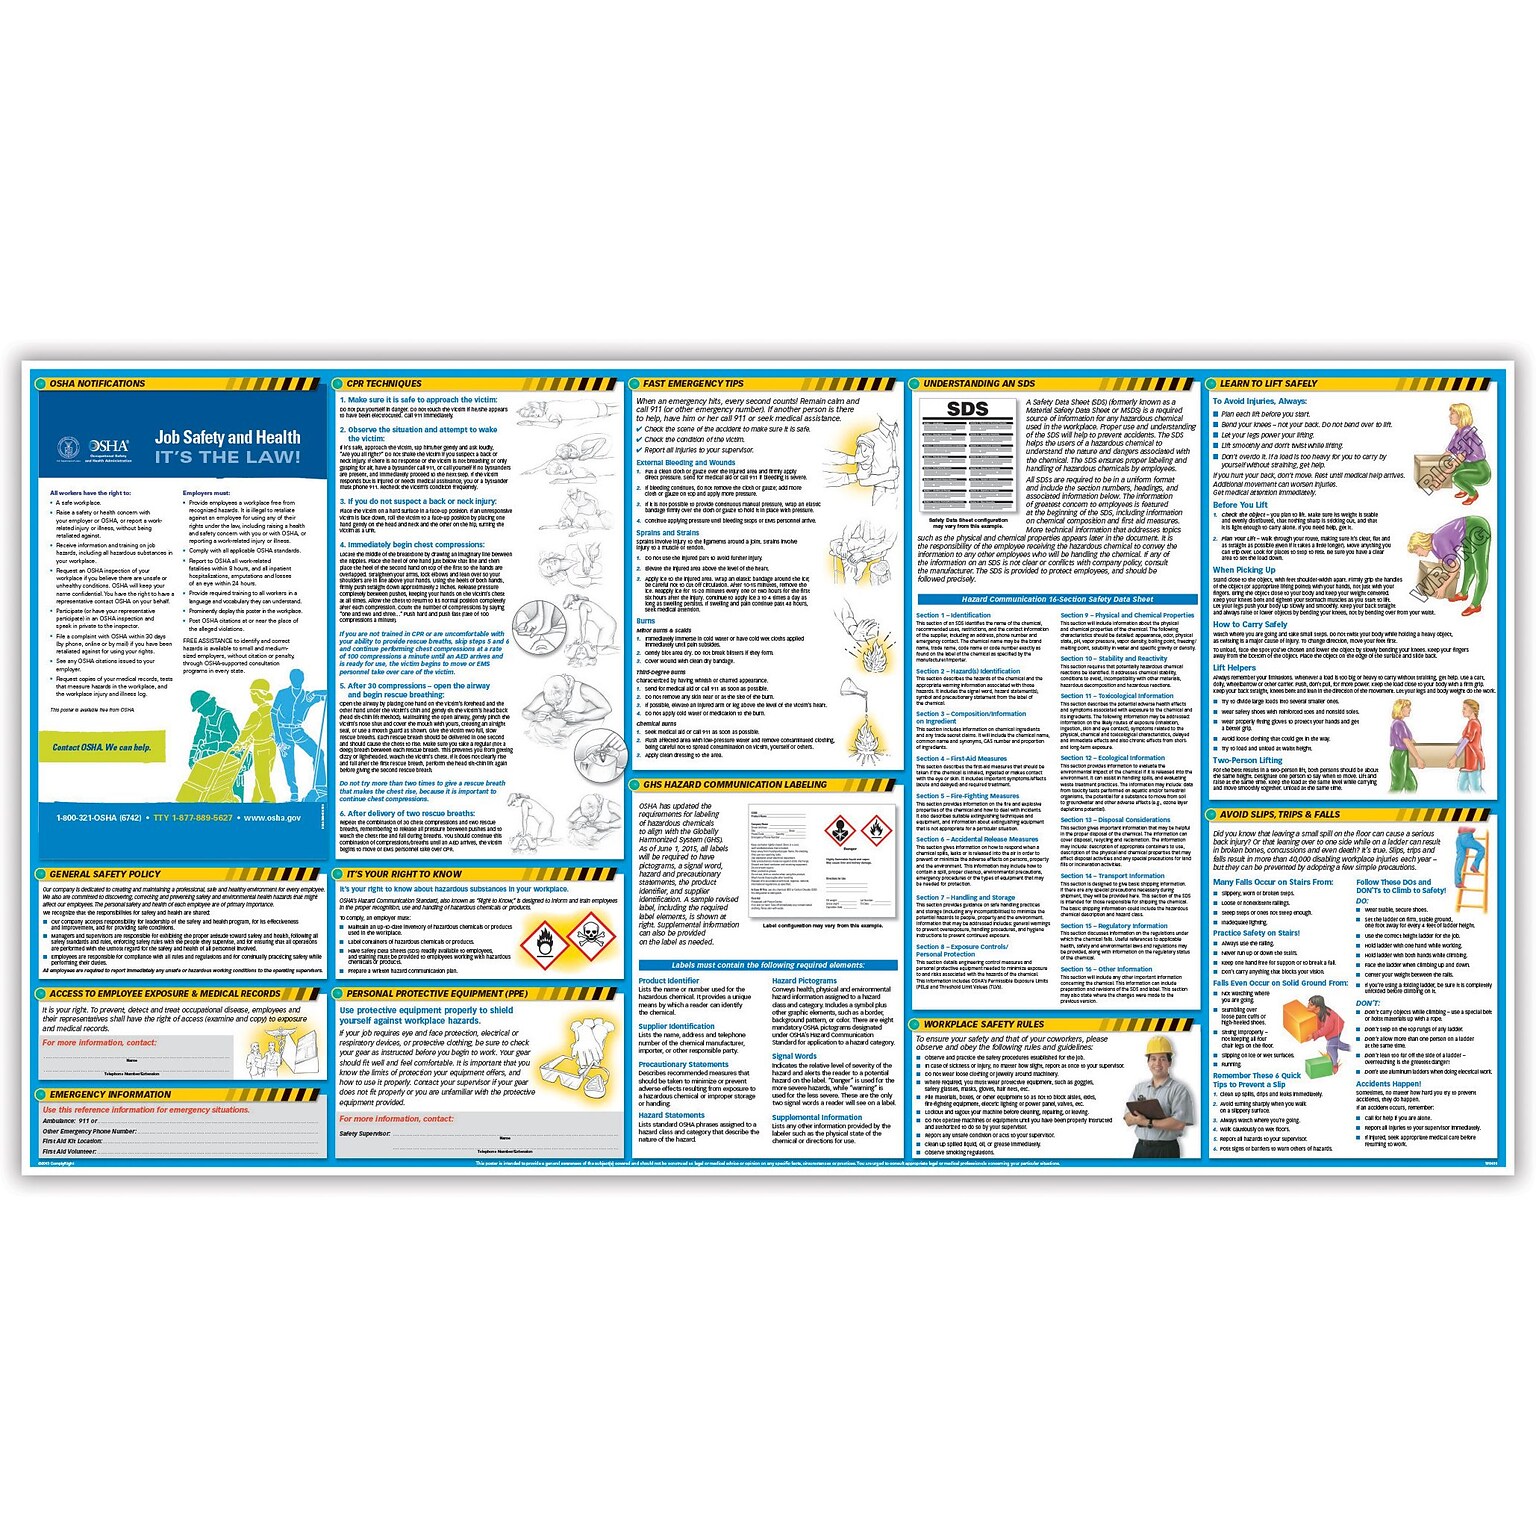 ComplyRight™ Safety Posters, All-In-One Safety Poster (WR0430)